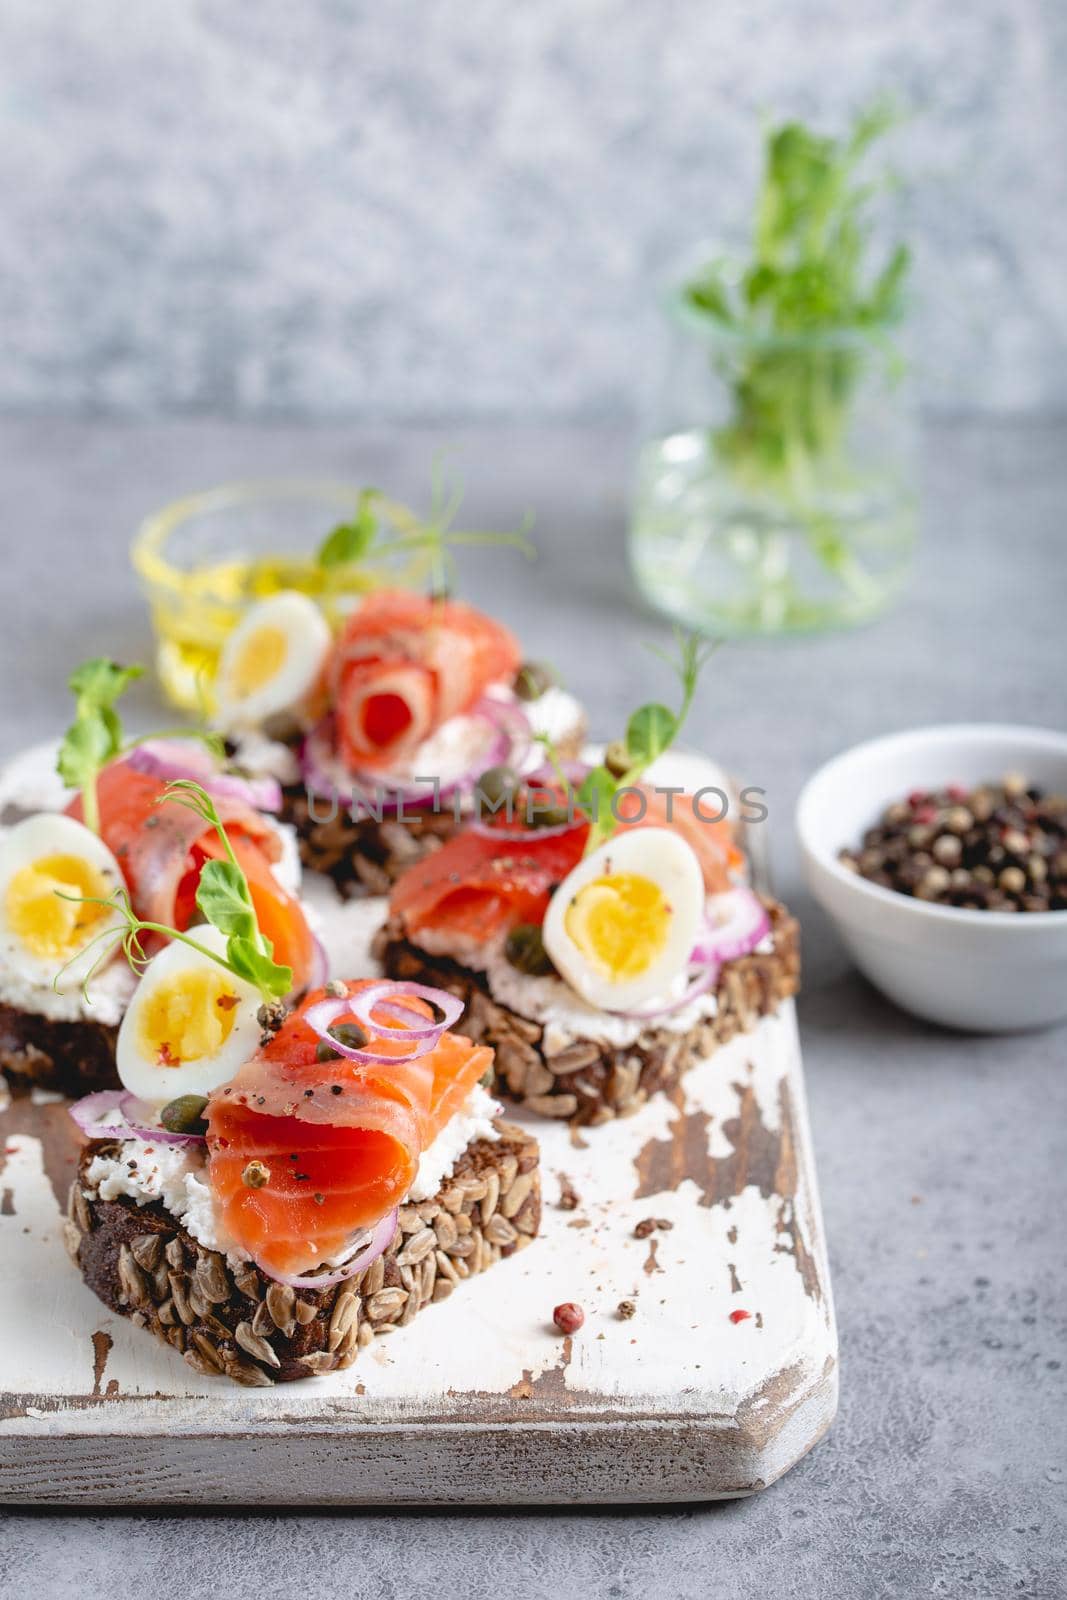 Close-up of sandwich with dark rye bread, cream cheese, salmon, onion, capers, boiled egg on white wooden cutting board, concrete background. Traditional Scandinavian open sandwich Smorrebrod.